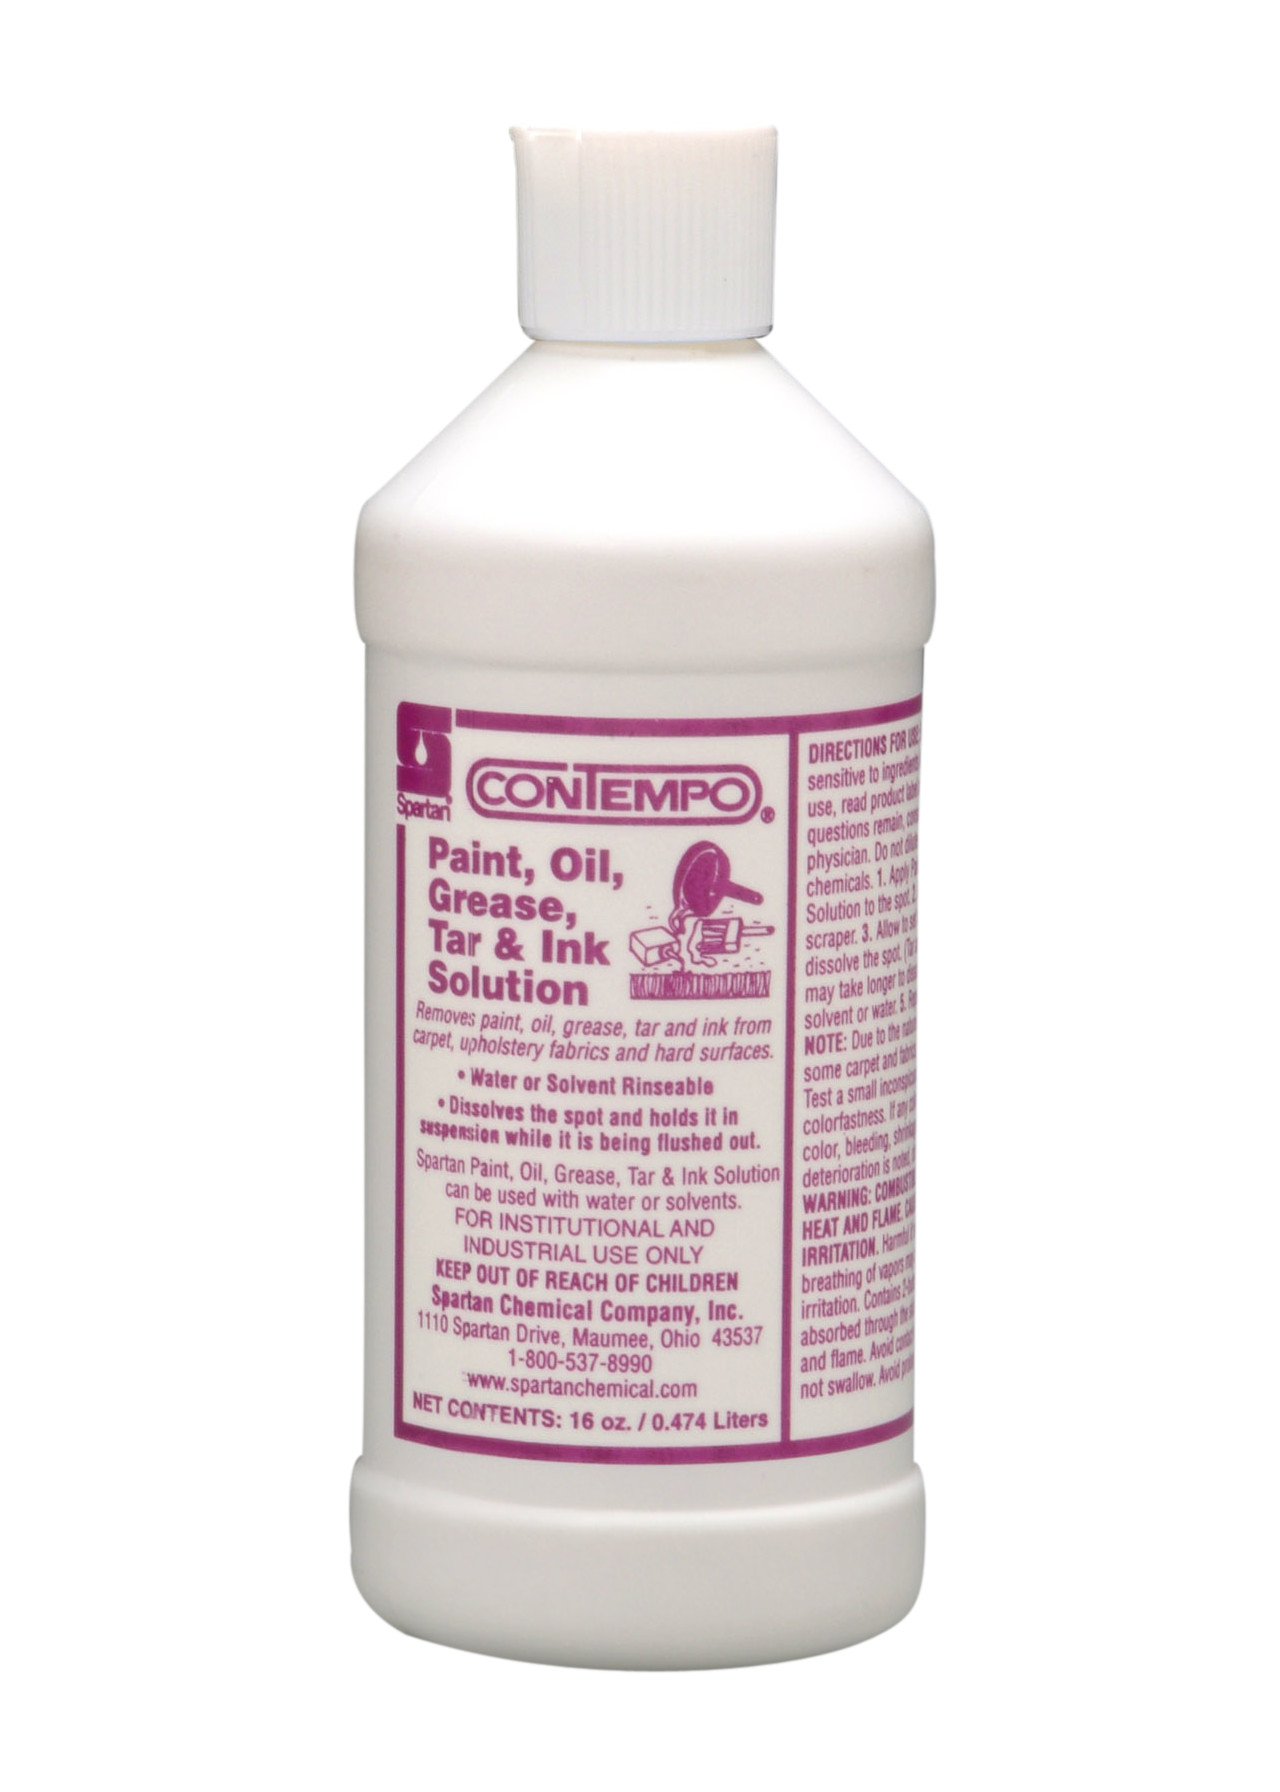 Spartan Chemical Company Contempo Paint, Oil, Grease, Tar & Ink Solution, 16OZ 12/CASE